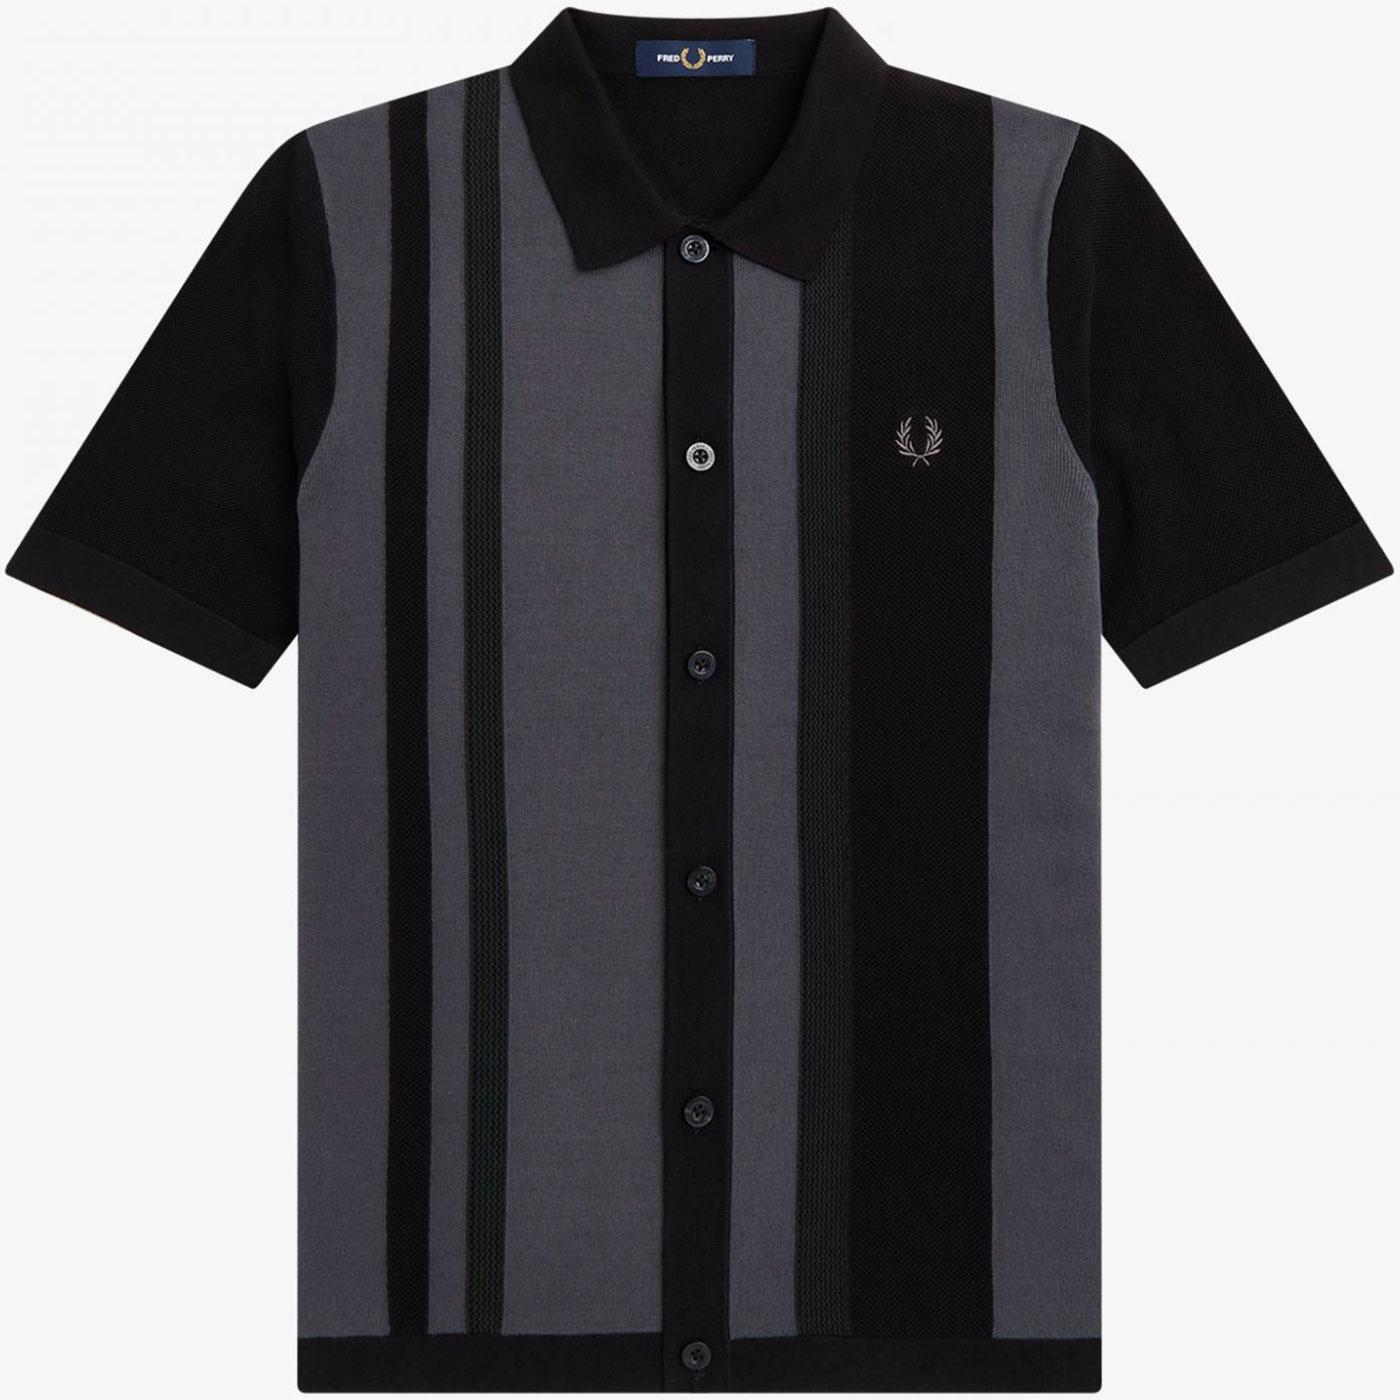 Fred Perry Retro Mod Striped Knitted Shirt Black 